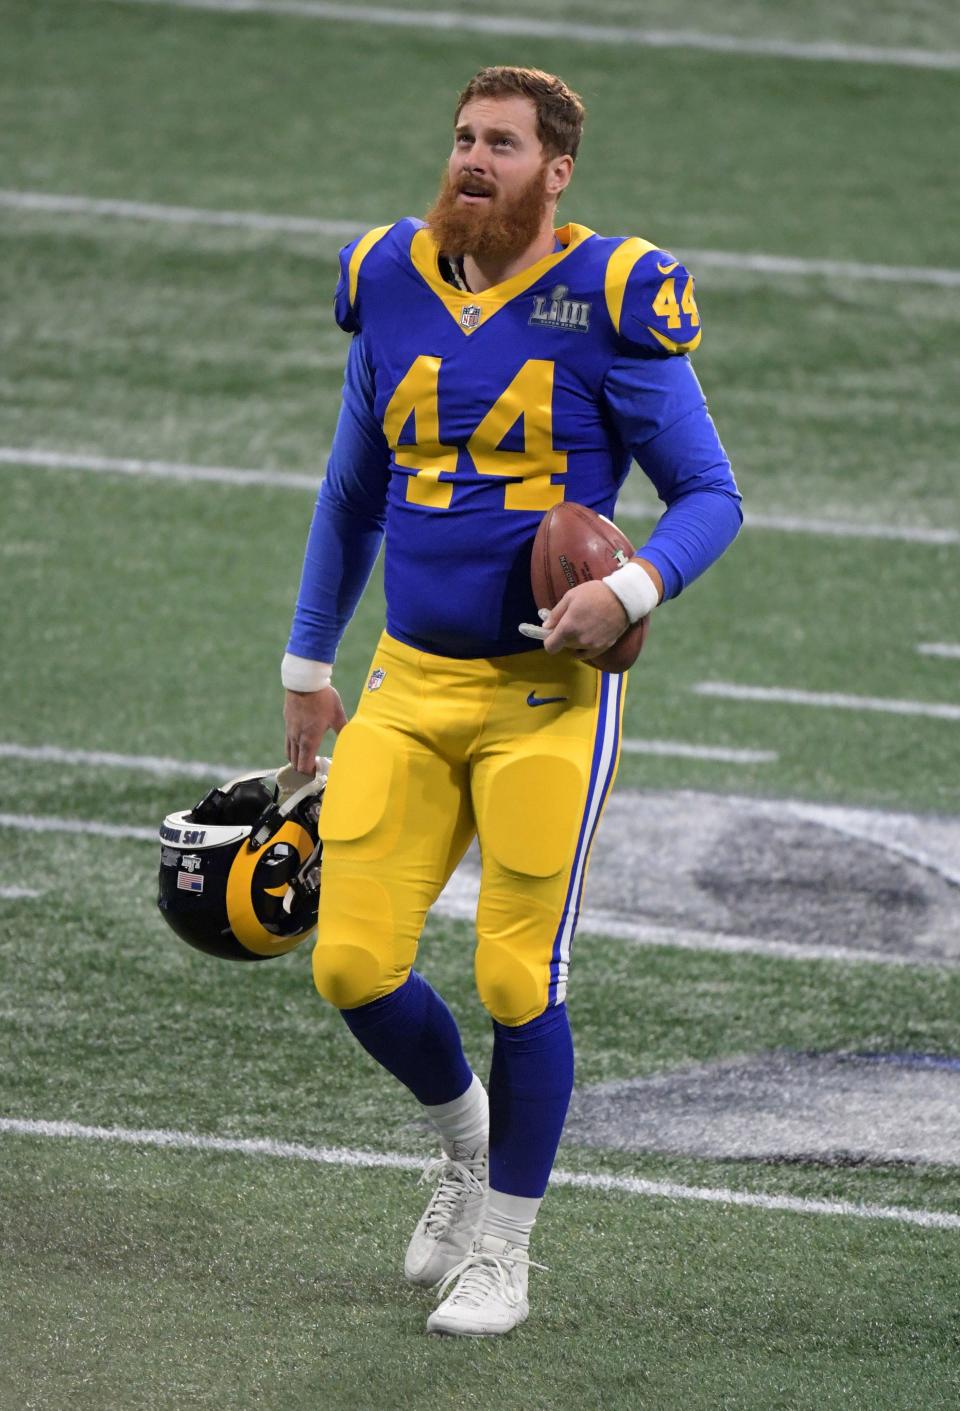 Los Angeles Rams long snapper Jake McQuaide (44) participated in Super Bowl 53 against the New England Patriots at Mercedes-Benz Stadium.